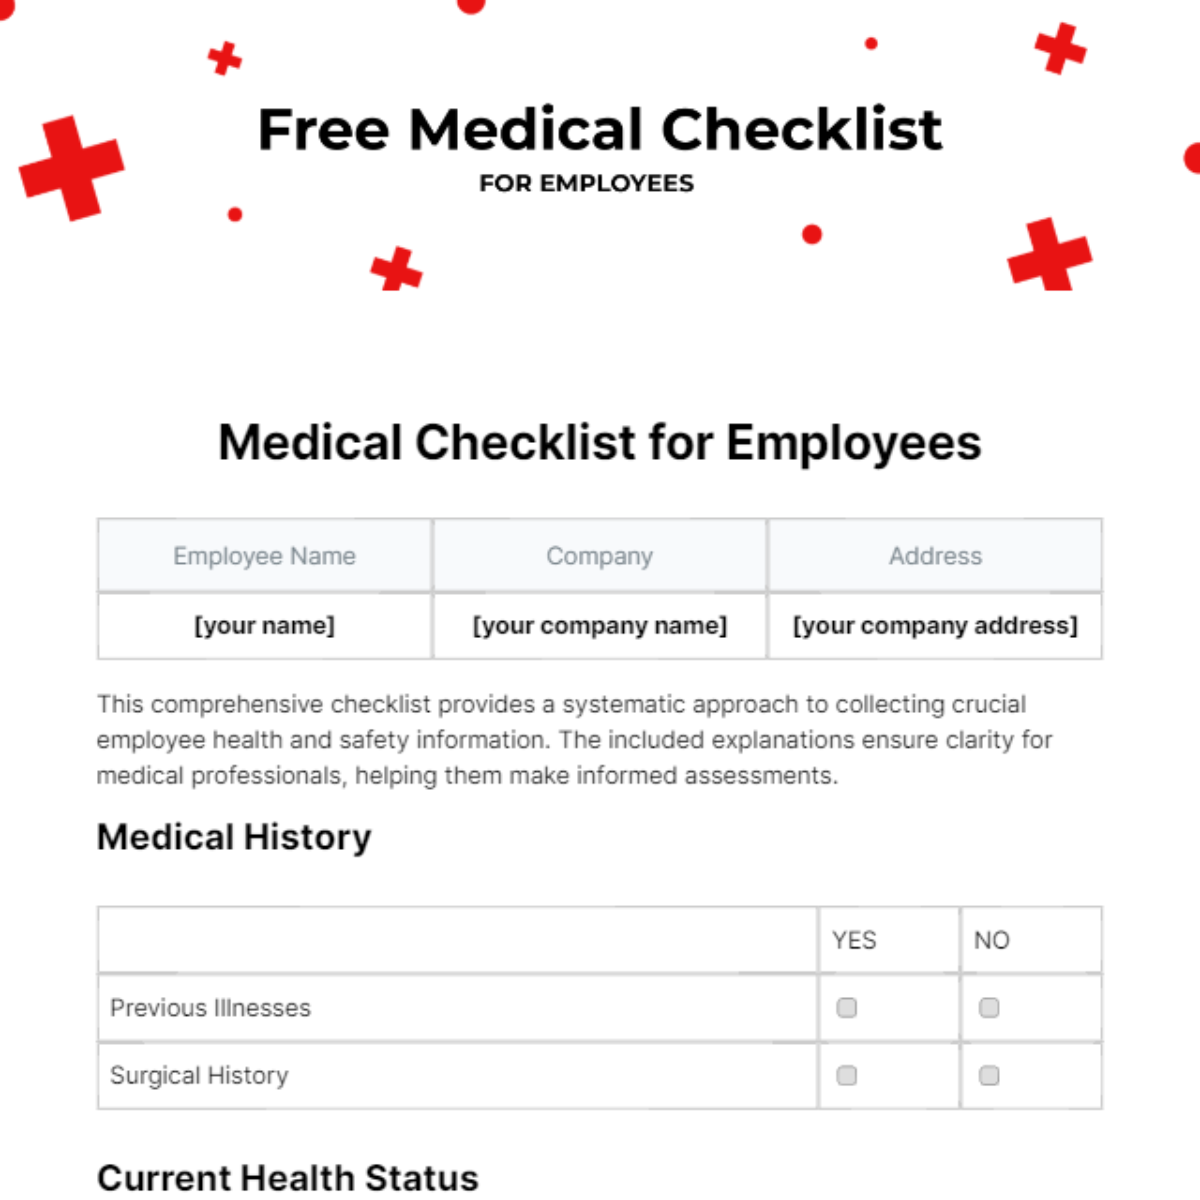 Free Medical Checklist for Employees Template